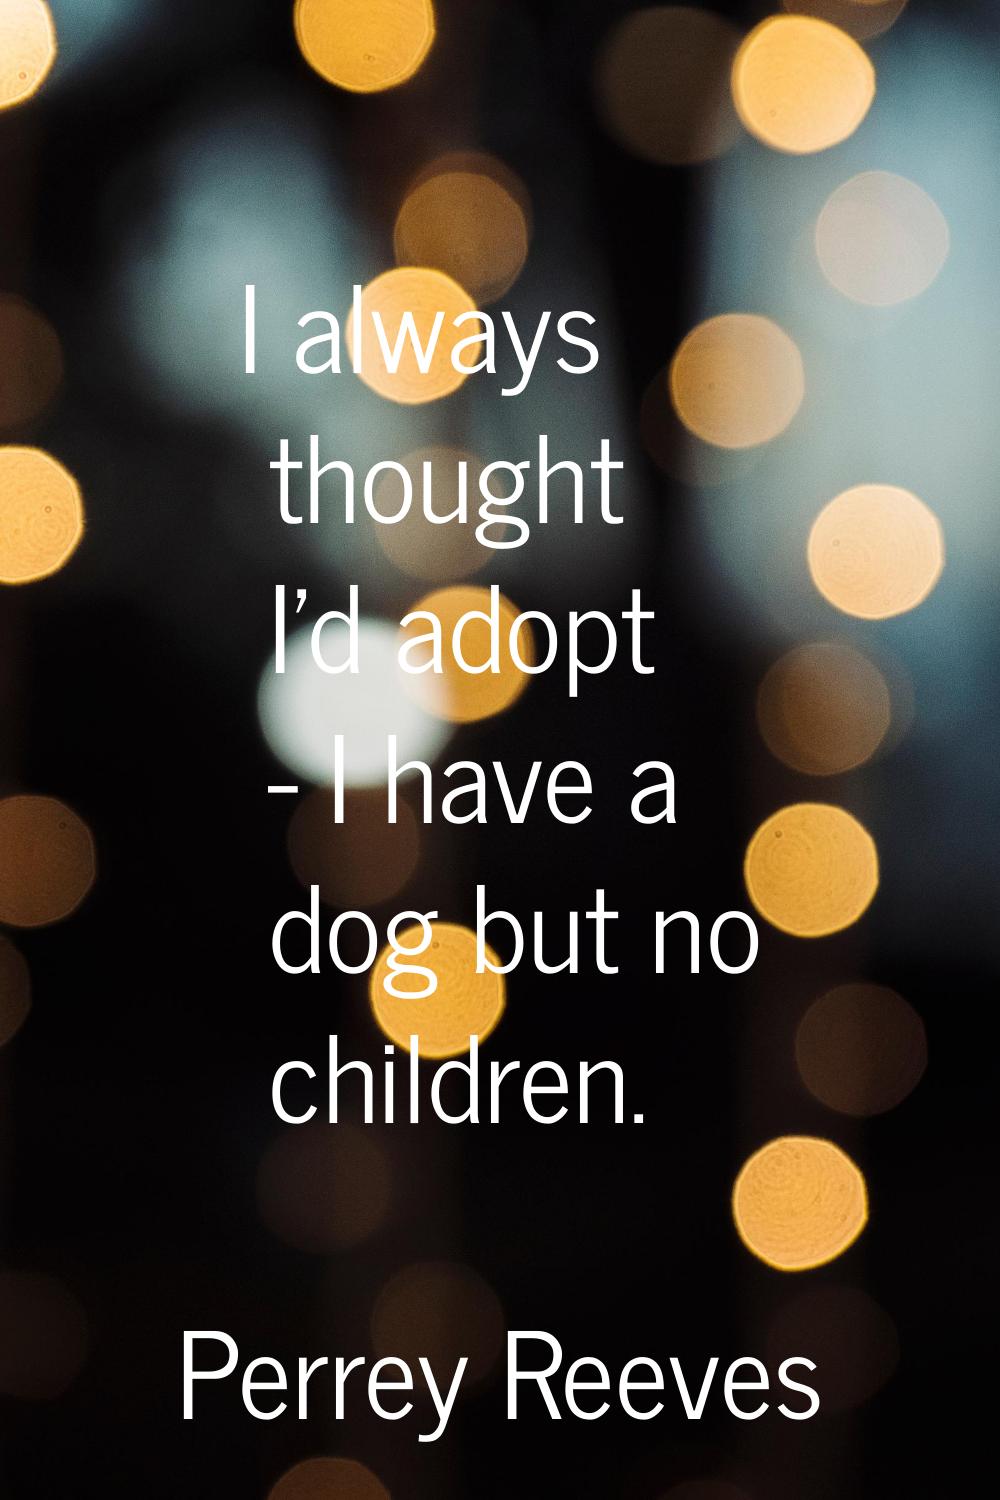 I always thought I'd adopt - I have a dog but no children.